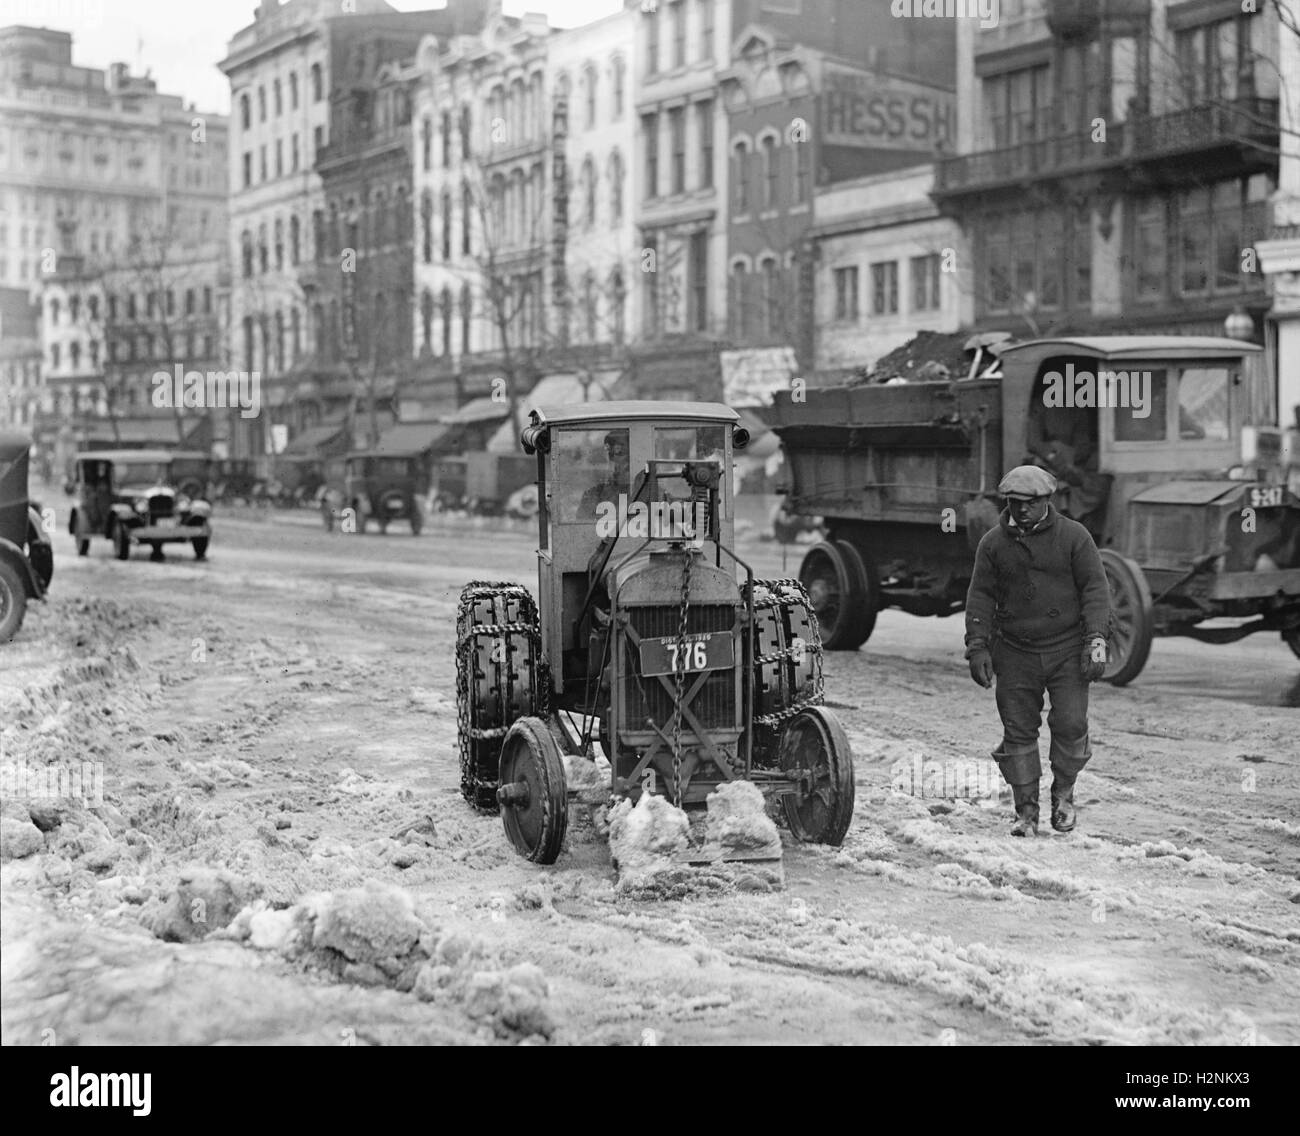 Ford Tractor Removing Snow from Street, Washington DC, USA, National Photo Company, 1924 Stock Photo